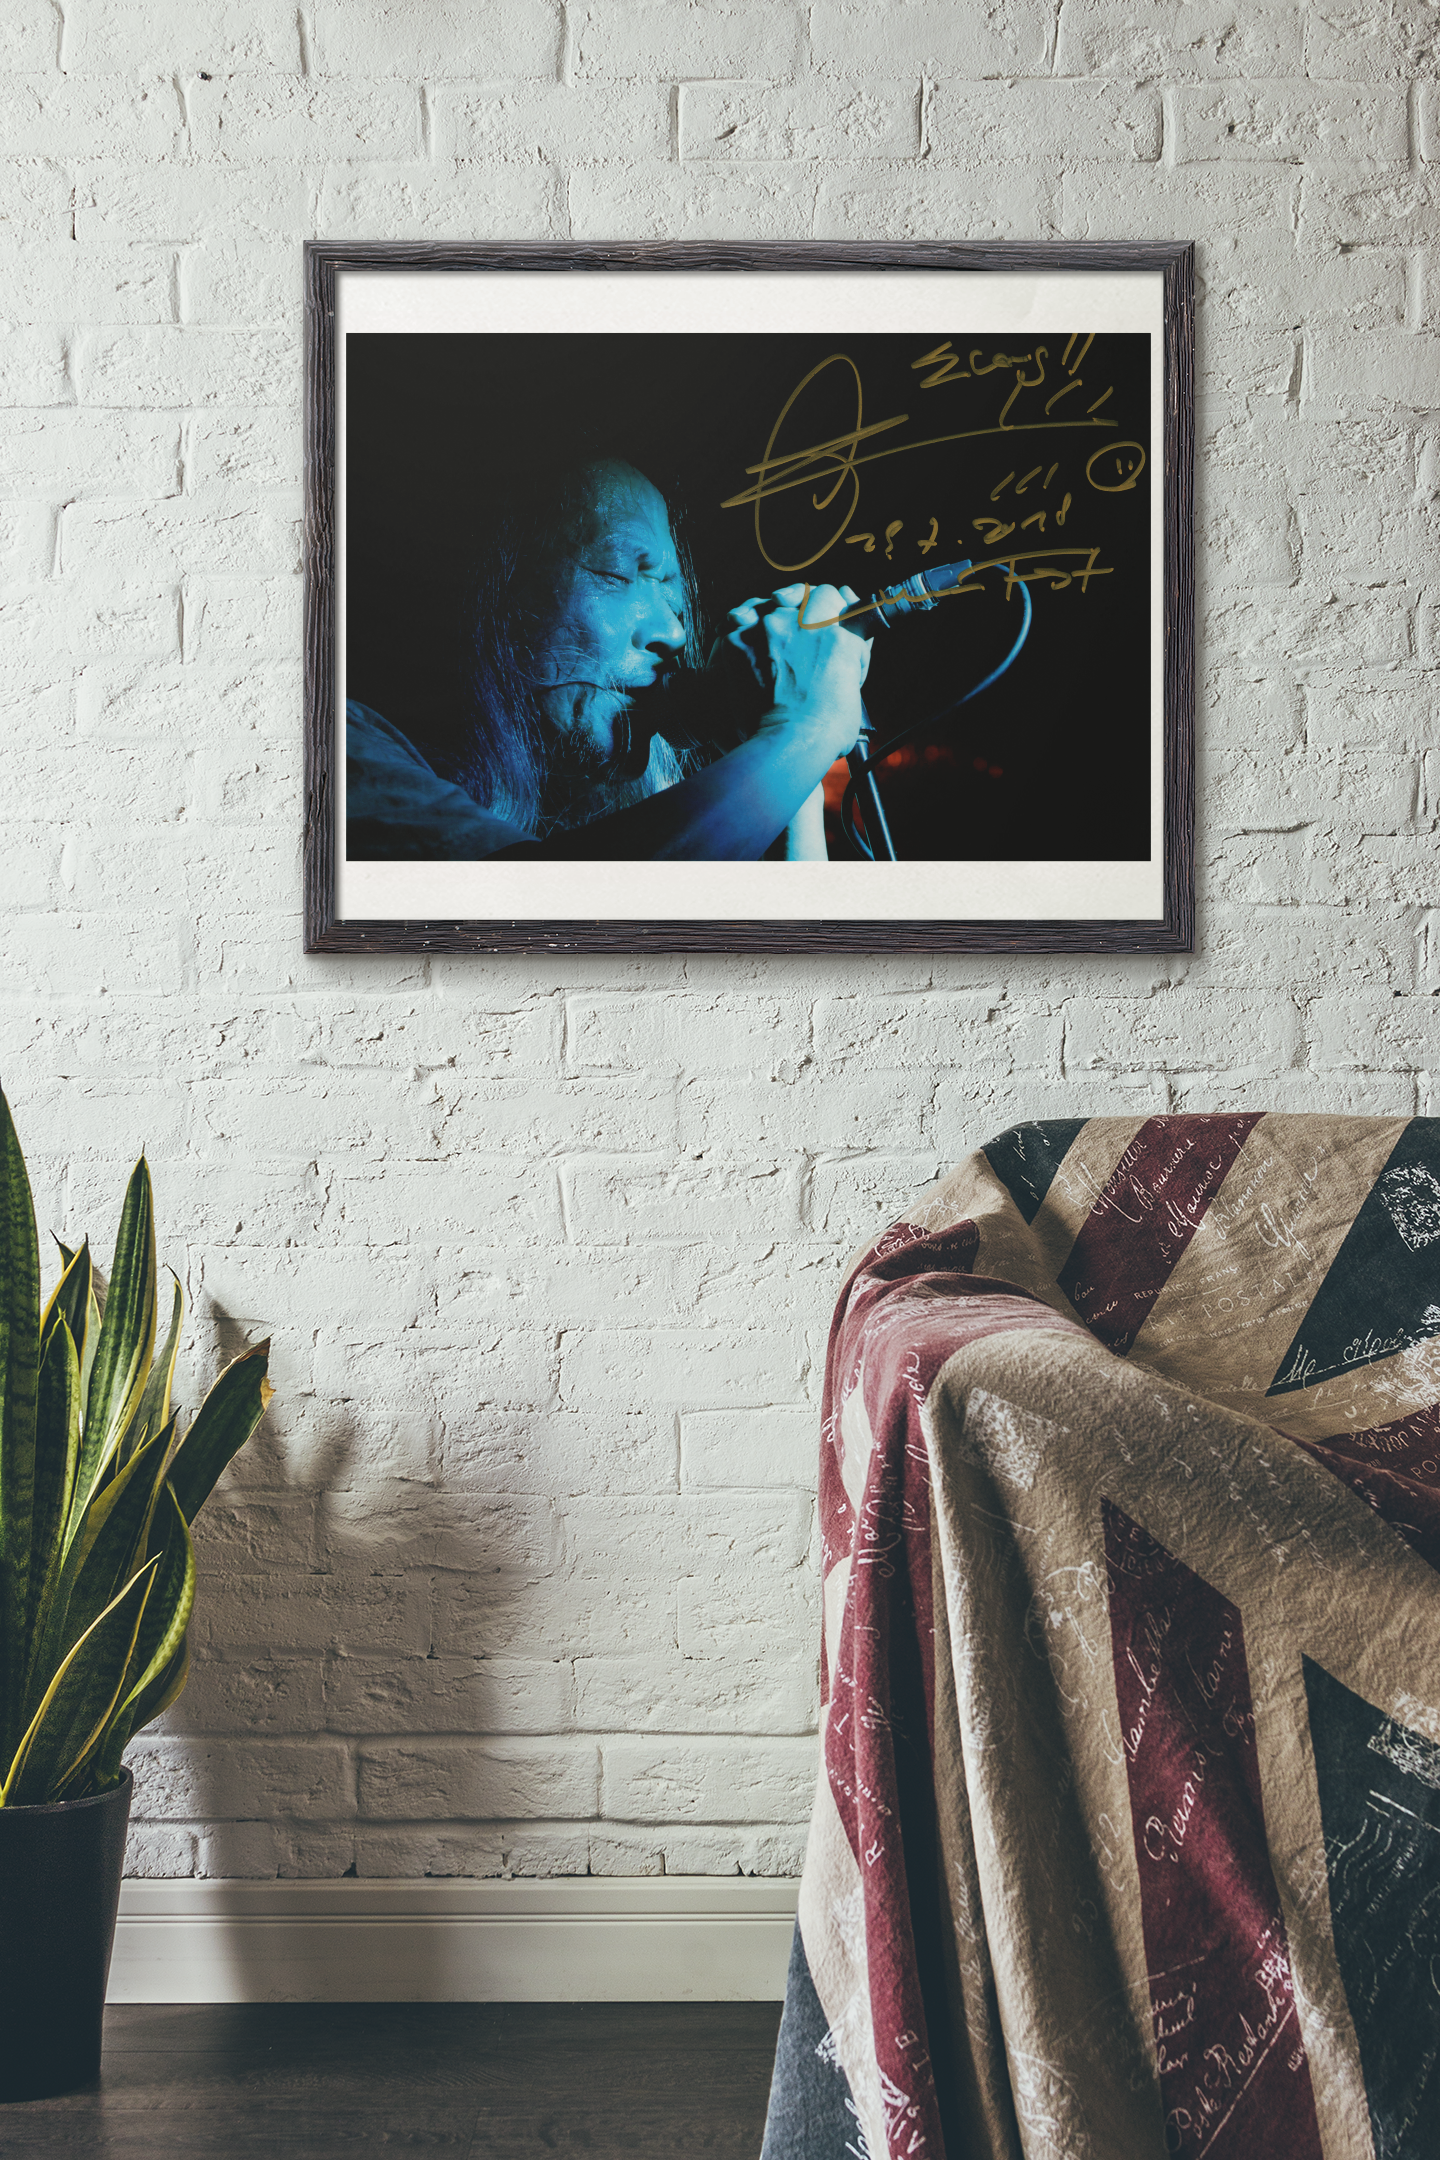 Damo Suzuki, 12x18 Inch, Signed Photo Re-Print @ Hope and Ruin - Photo by Michelle Heighway